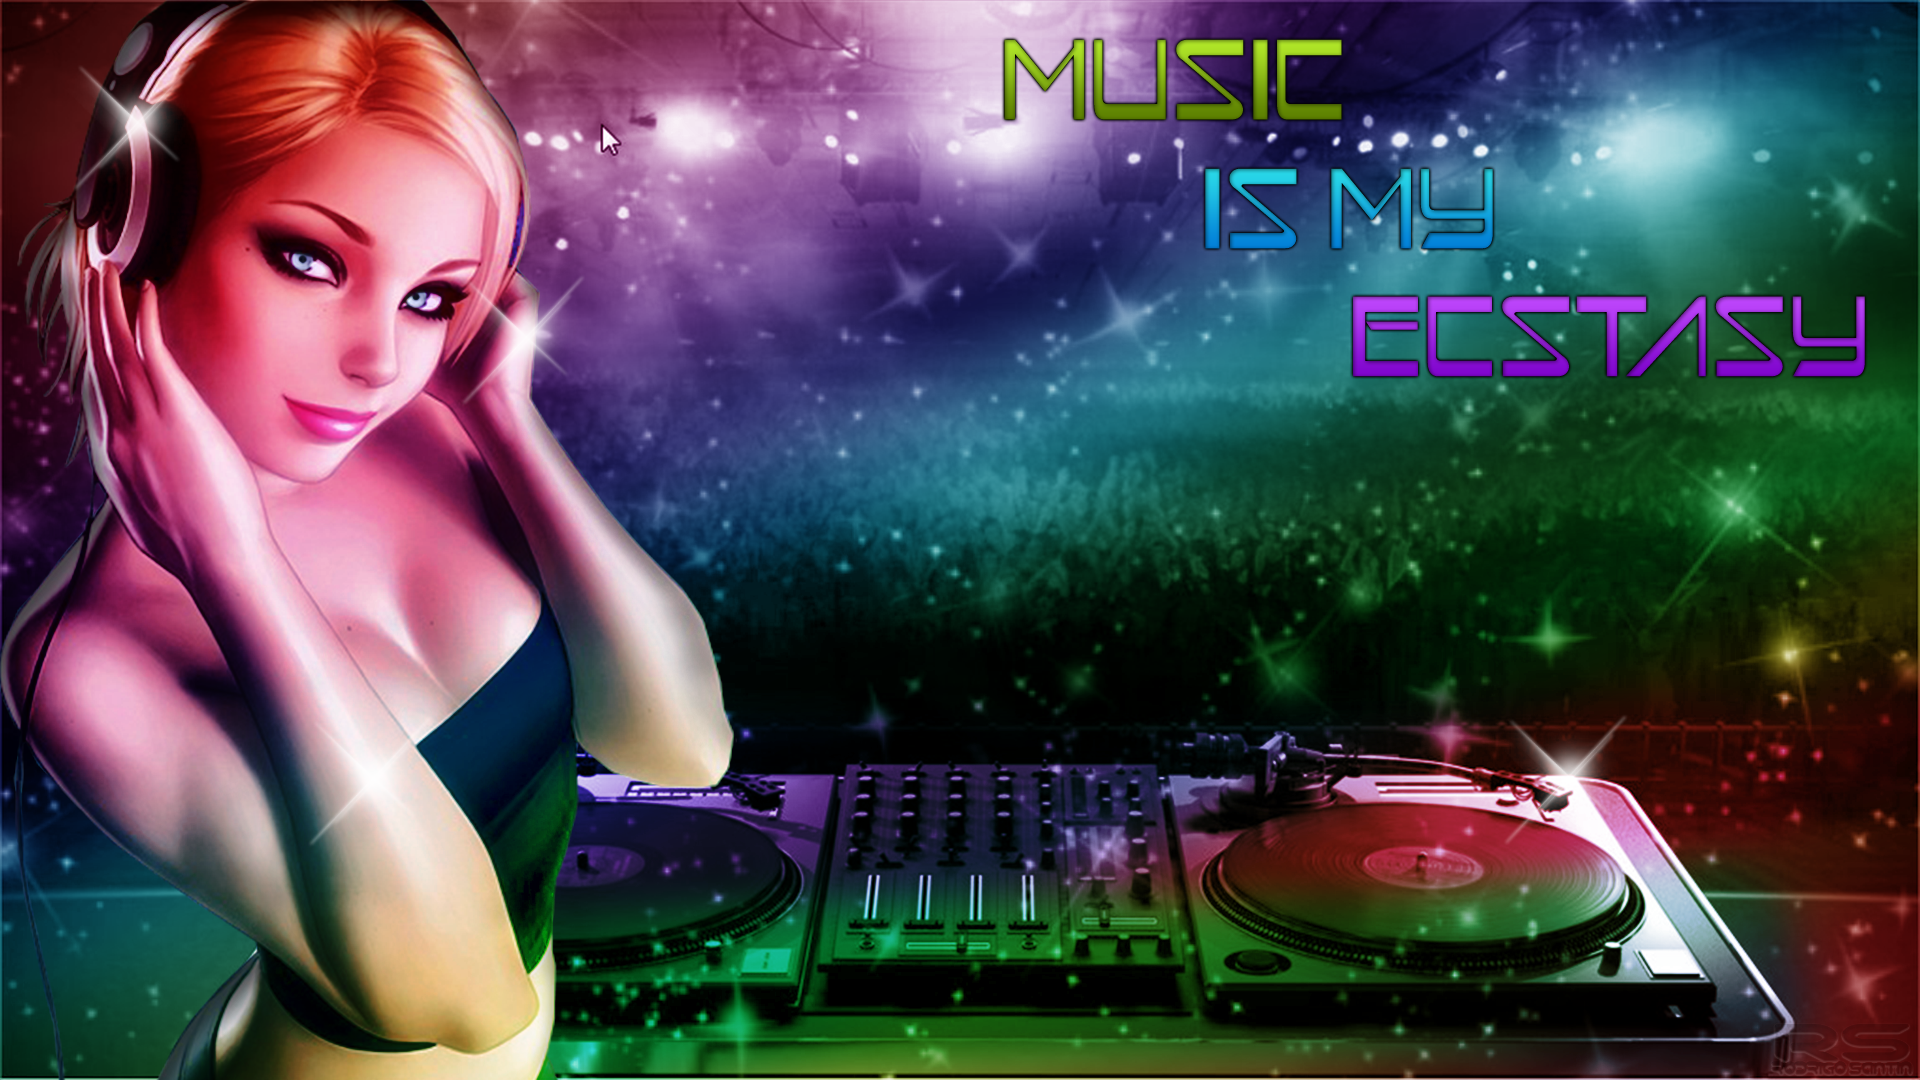 Music Is My Ecstasy Wallpaper by shadowunic on DeviantArt